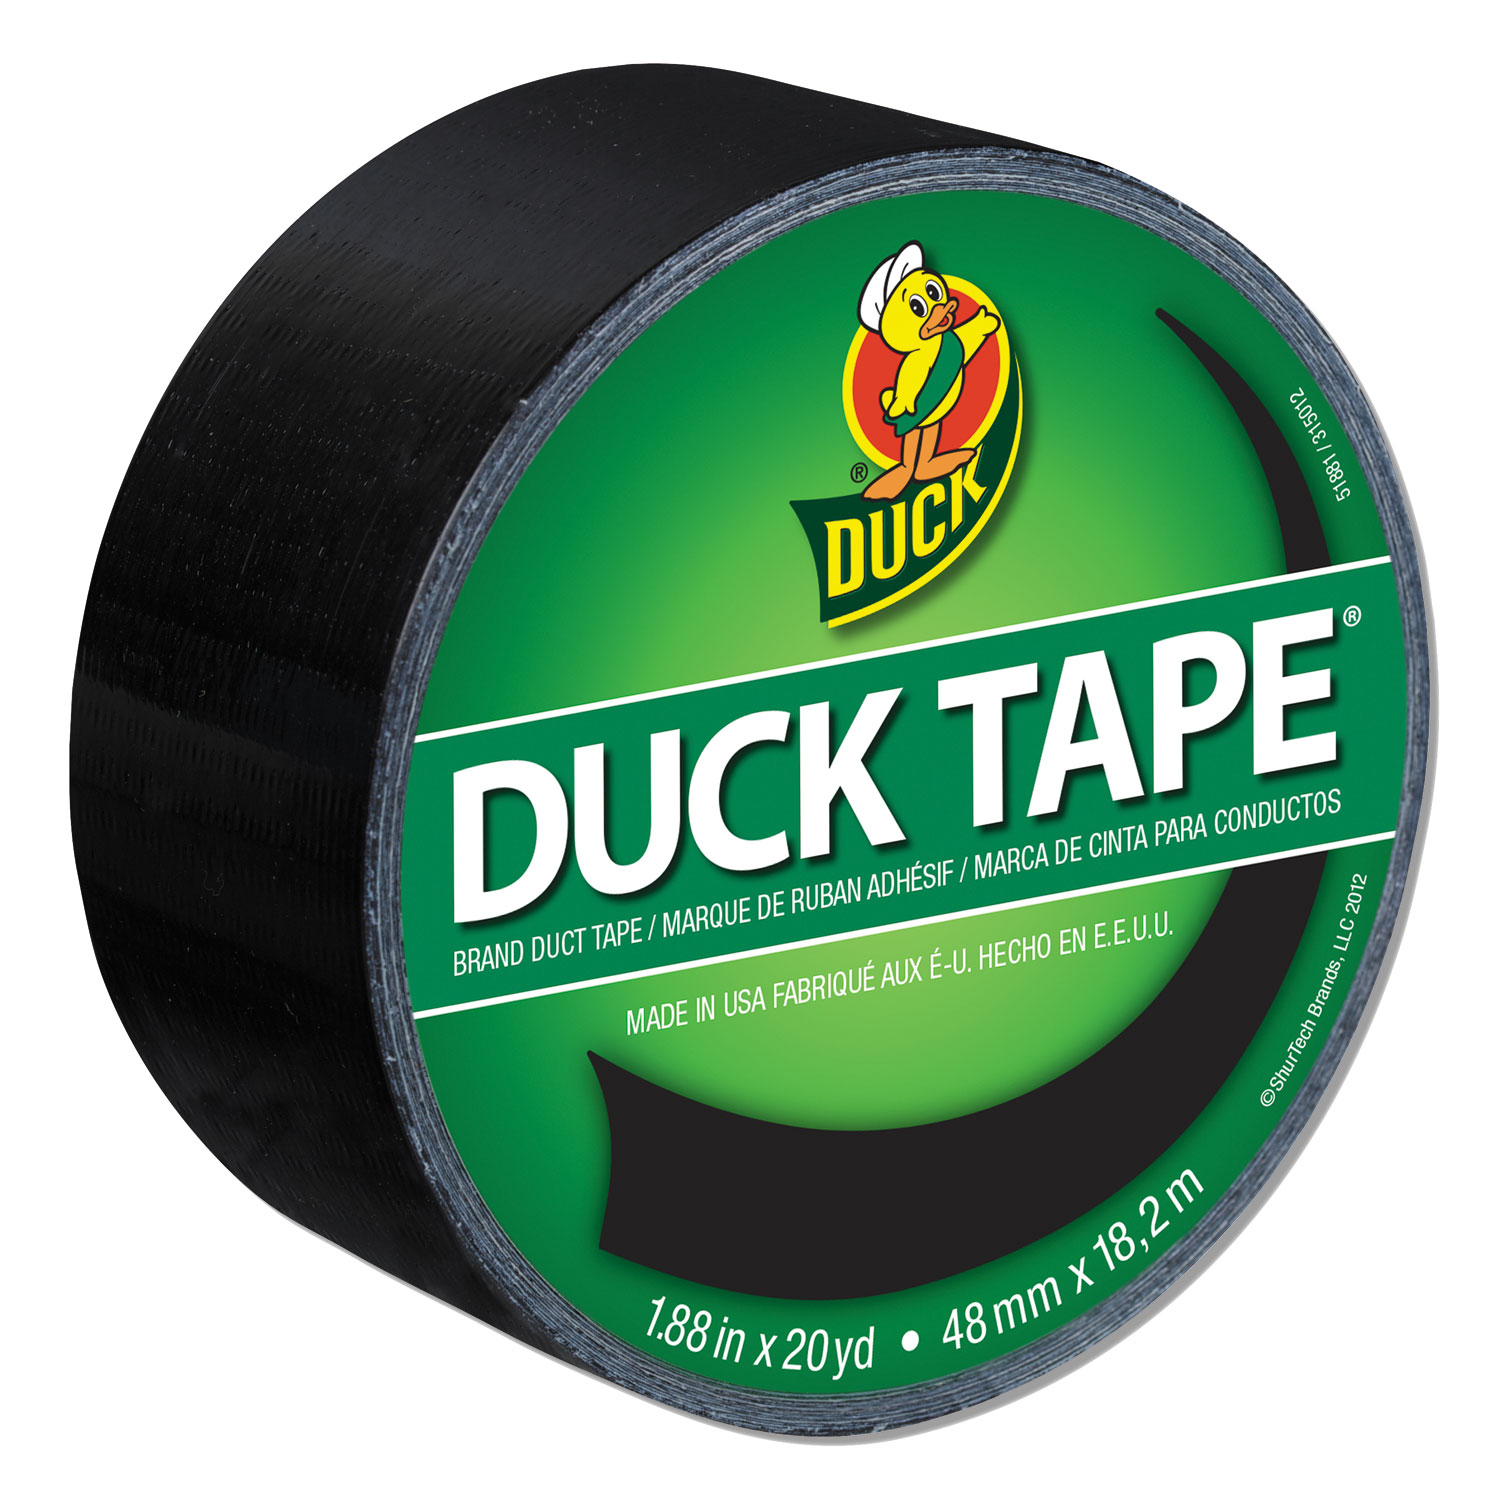  Duck 392875 Colored Duct Tape, 3 Core, 1.88 x 20 yds, Black (DUC1265013) 